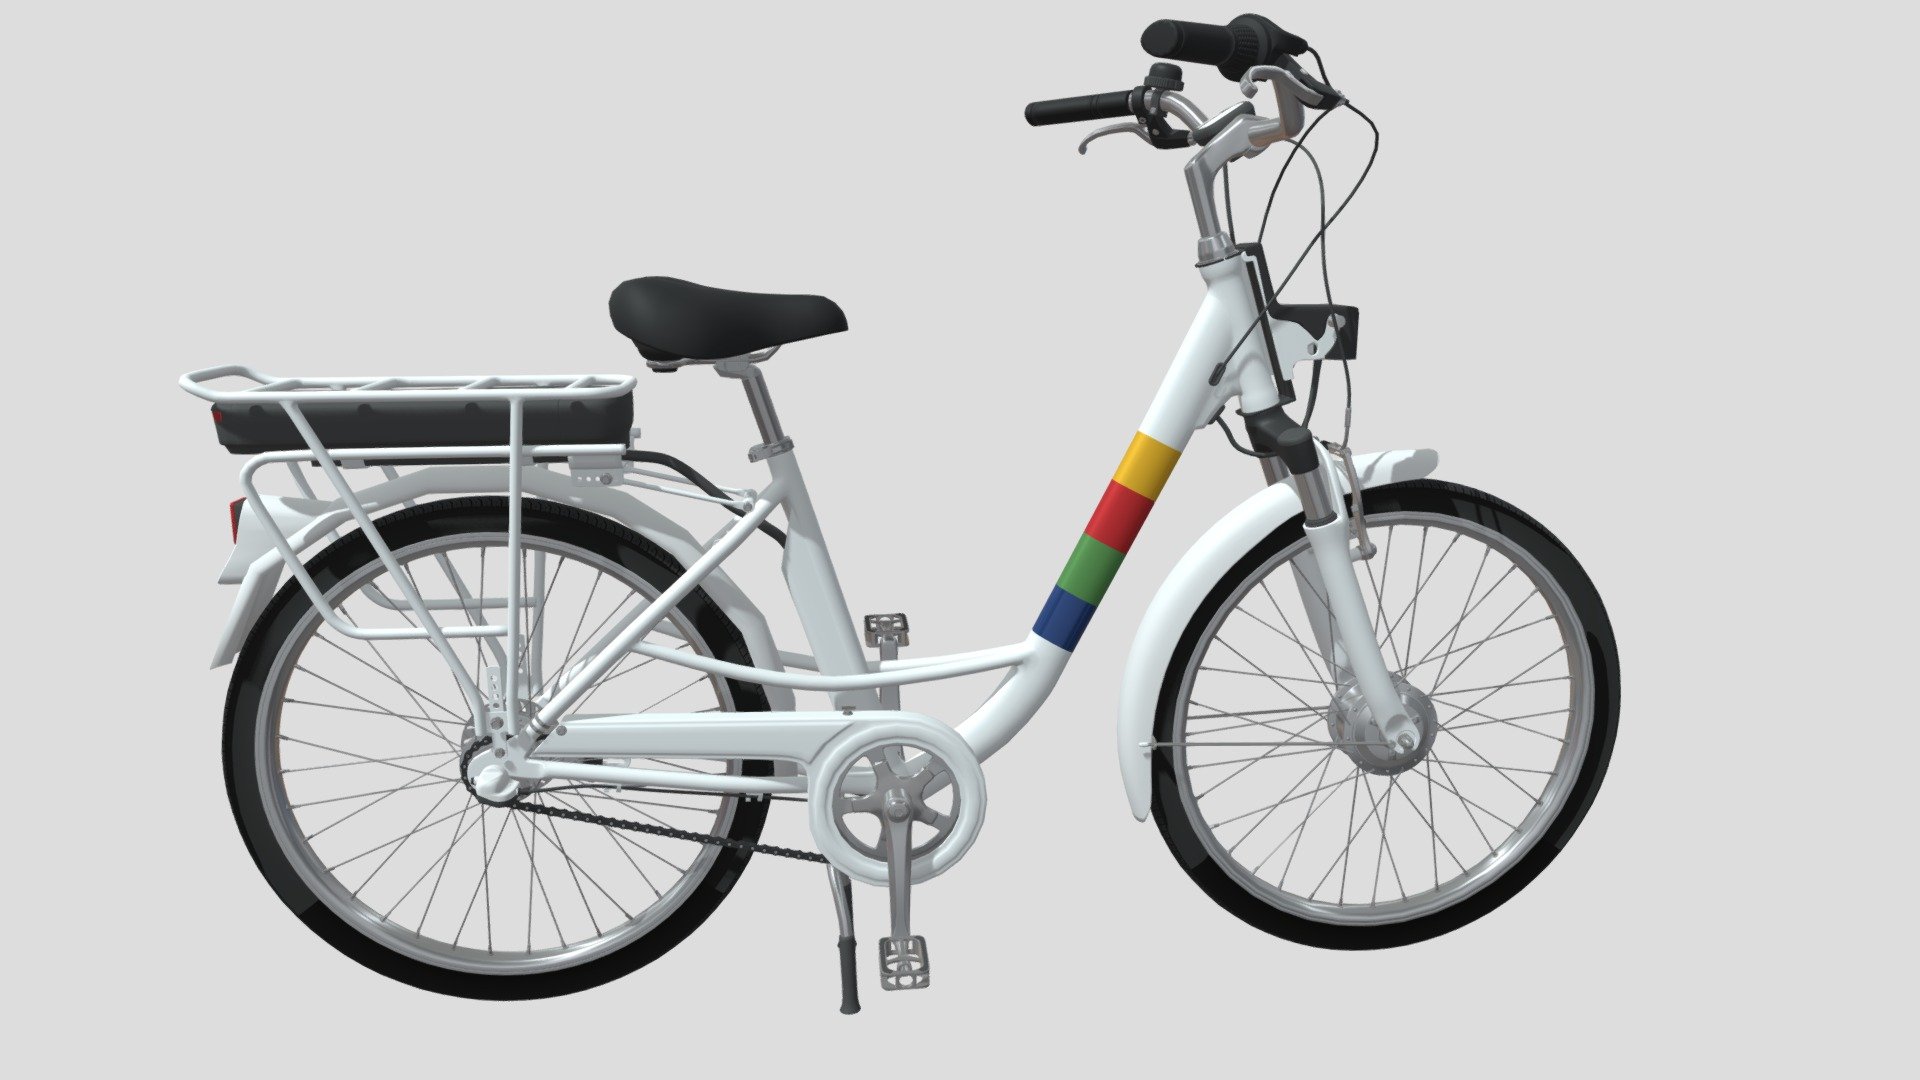 A very accurate model of an Electric Bicycle .

File formats:
-.blend, rendered with cycles, as seen in the images;
-.obj, with materials applied and textures;
-.dae, with materials applied and textures;
-.fbx, with material slots applied;
-.stl;

3D Software:
This 3d model was originally created in Blender 2.79 and rendered with Cycles.

Materials and textures:
The model has materials applied in all formats, and is ready to import and render.
The model comes with multiple png image textures.

Preview scenes:
The preview images are rendered in Blender using its built-in render engine &lsquo;Cycles'.
Note that the blend files come directly with the rendering scene included and the render command will generate the exact result as seen in previews.
Scene elements are on a different layer from the actual model for easier manipulation of objects.

General:
The model is built strictly out of quads and is subdivisable.
It comes in separate parts, named correctly for the sake of convenience 3d model